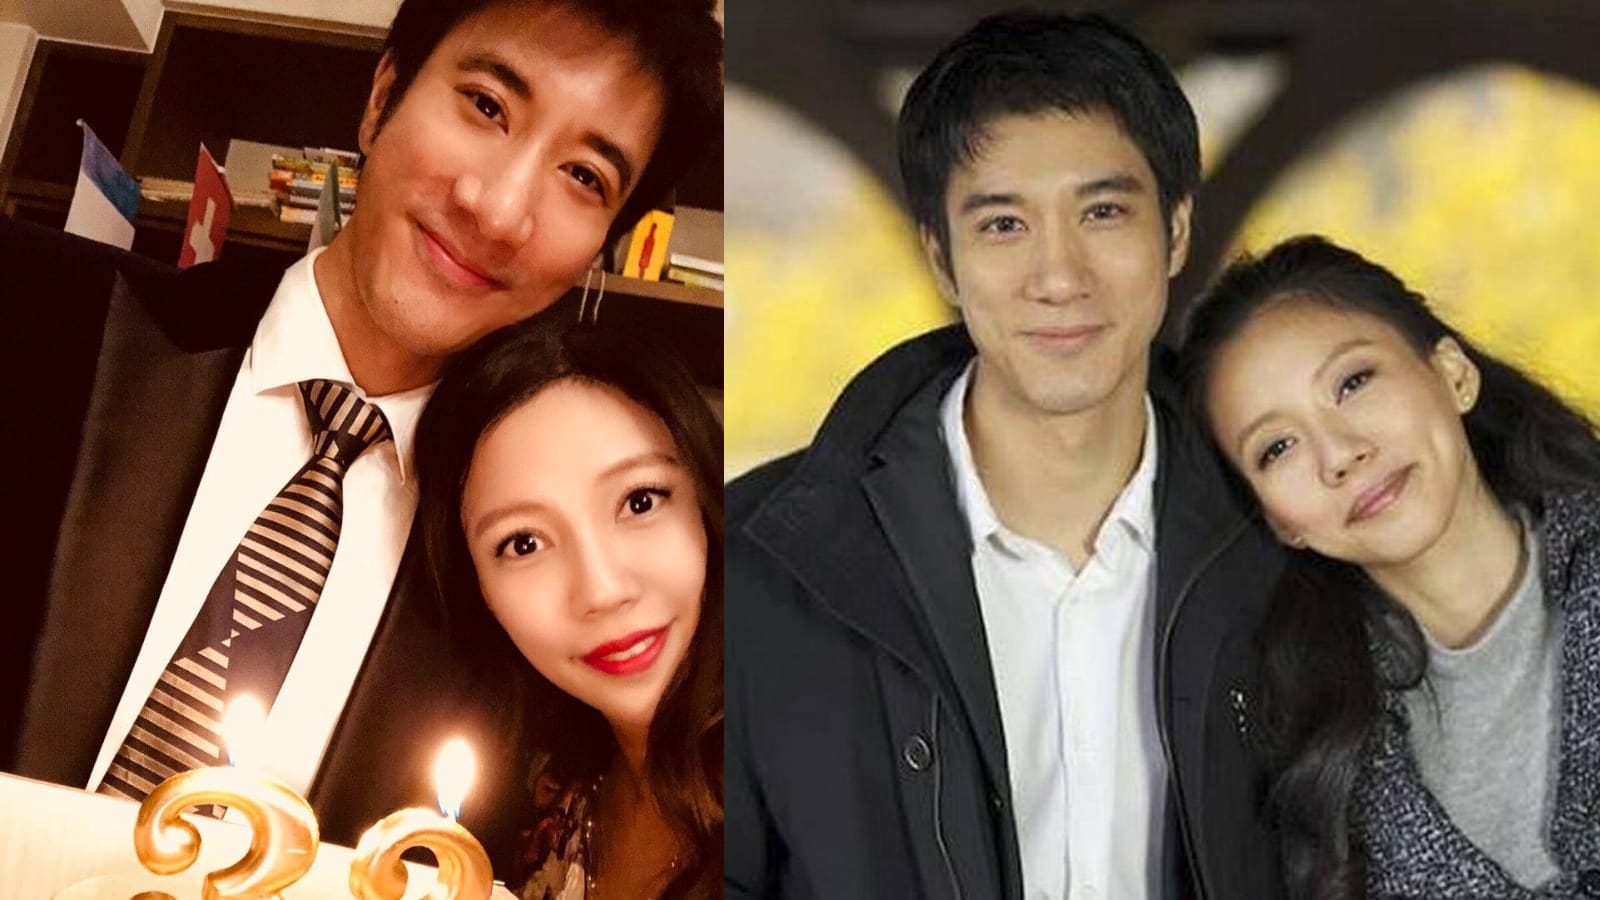 Wang Leehom’s Wife Says The Singer Has Many Sex Partners And Hires Prostitutes In Damning Weibo Post